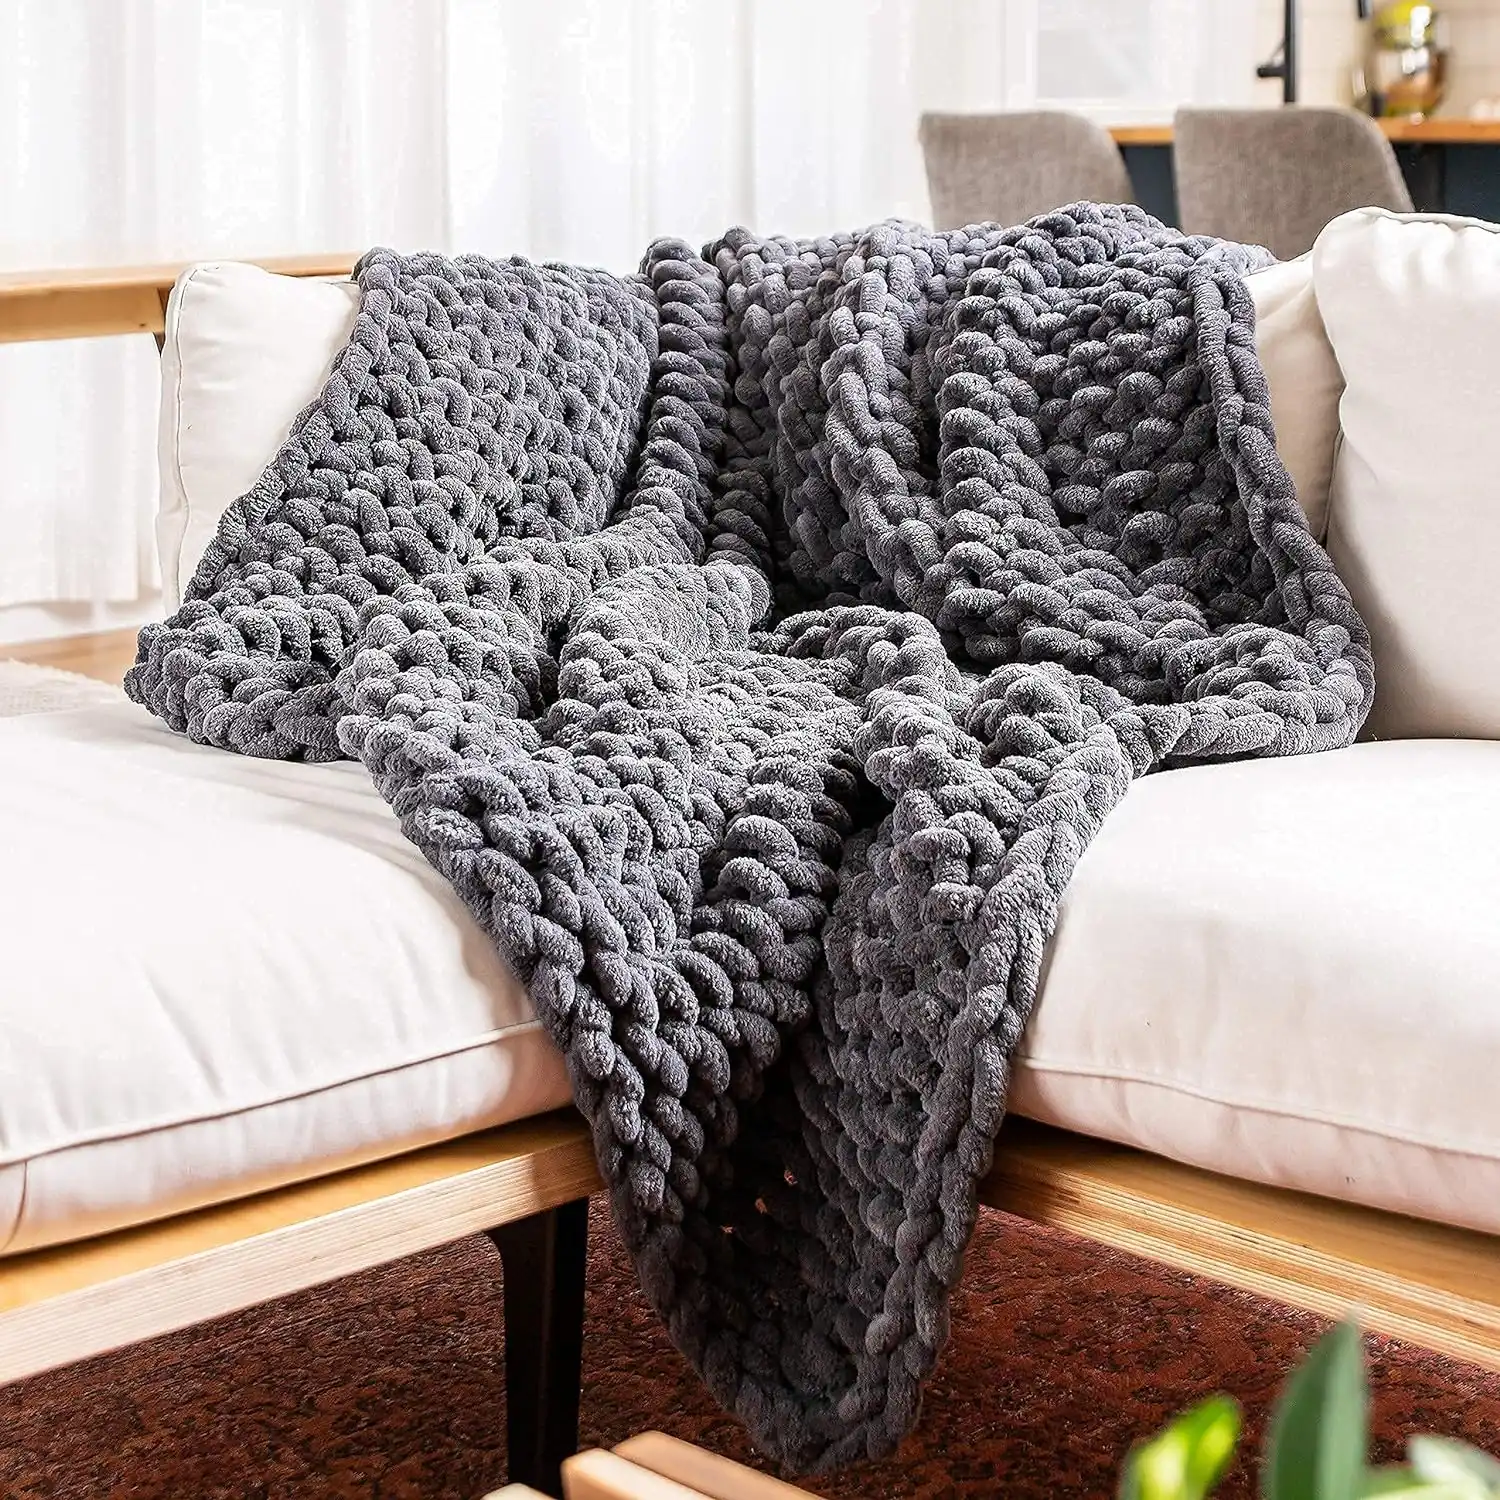 SAMIAH LUXE Grey Chunky Knit Blanket Throw 50x60; Knitted Throw Blankets for Boho Decor,Large Knit Blanket Chunky Yarn;Thick Knitted Chunky Blanket;Thick Cable Knit Throw for Couch, King/Queen Bed